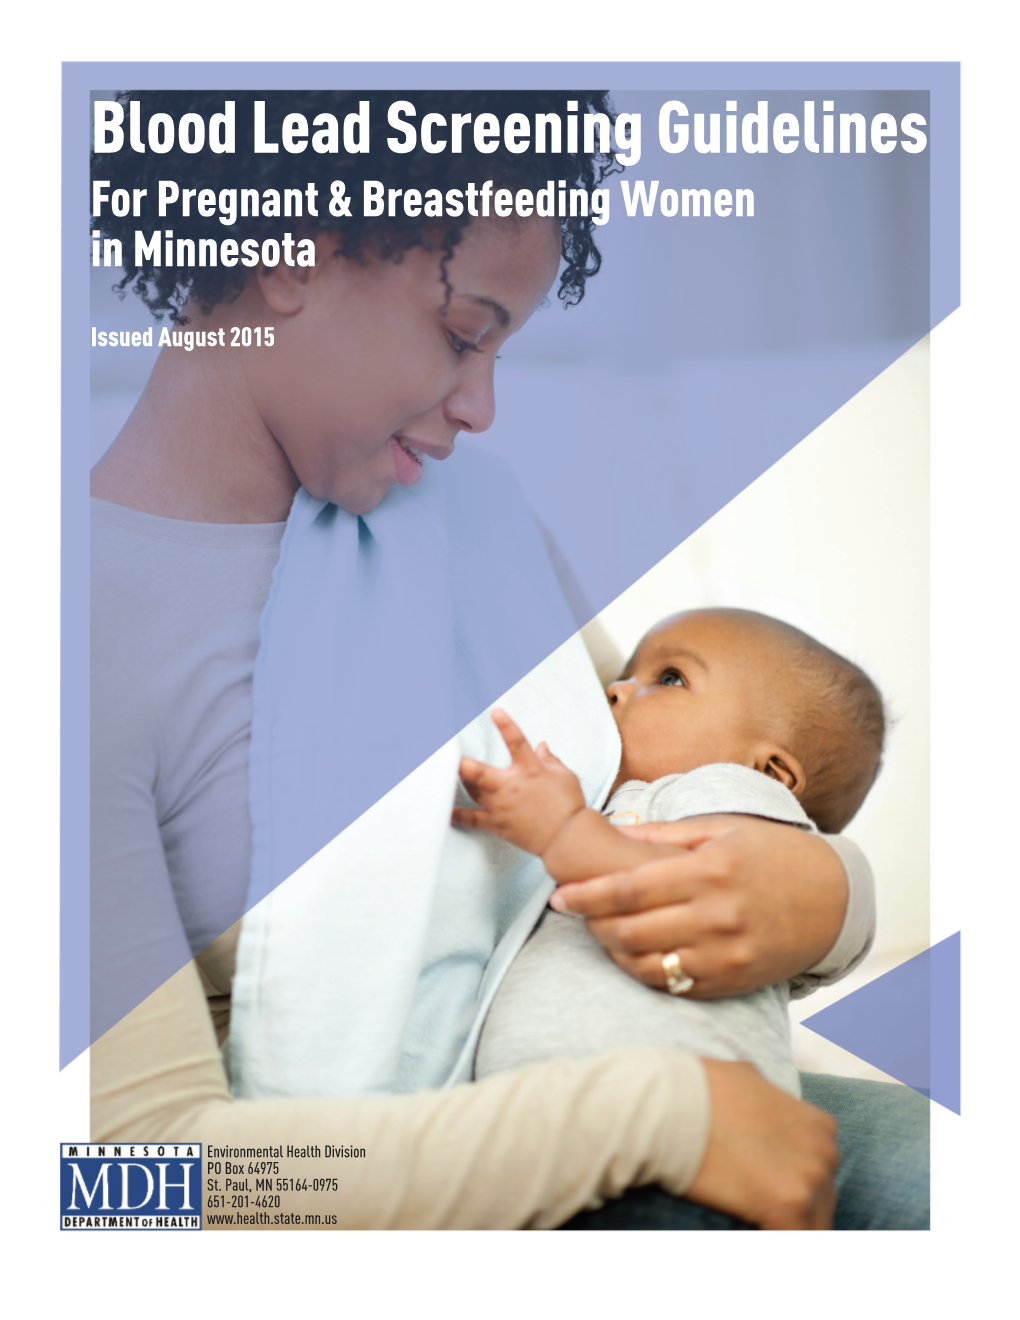 Blood Lead Screening Guidelines for Pregnant and Breastfeeding Women in Minnesota